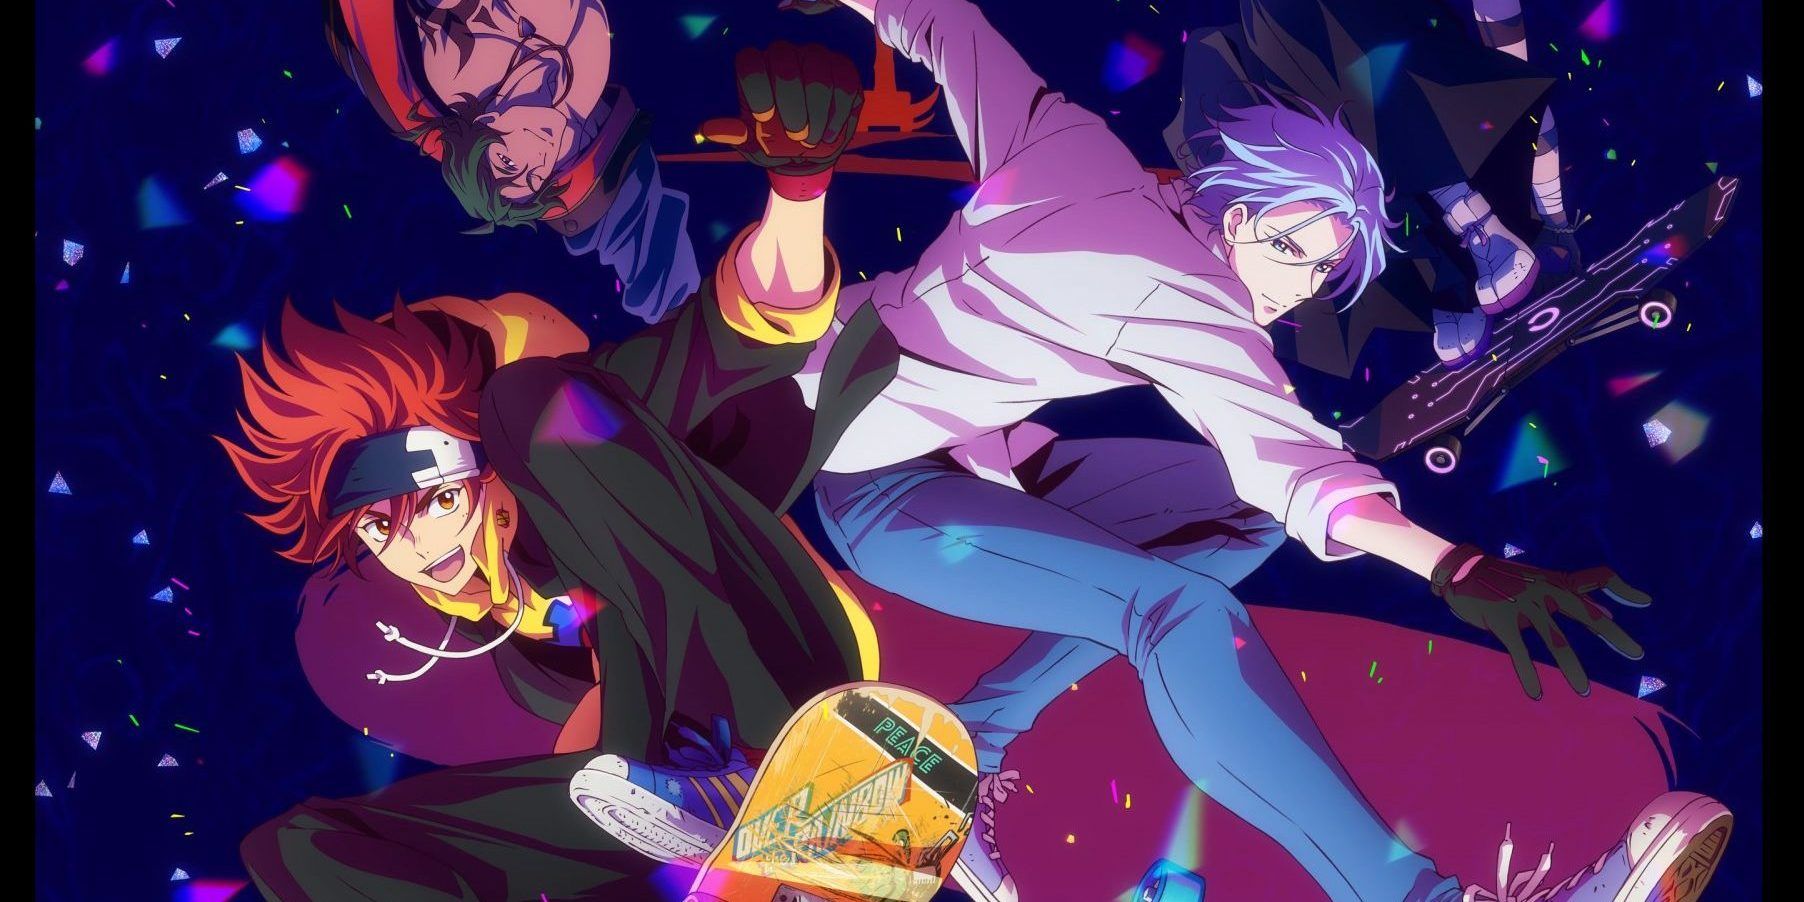 REVIEW: “SK8 the Infinity” is one of the most exciting new animes of 2021 –  UNIVERSITY PRESS